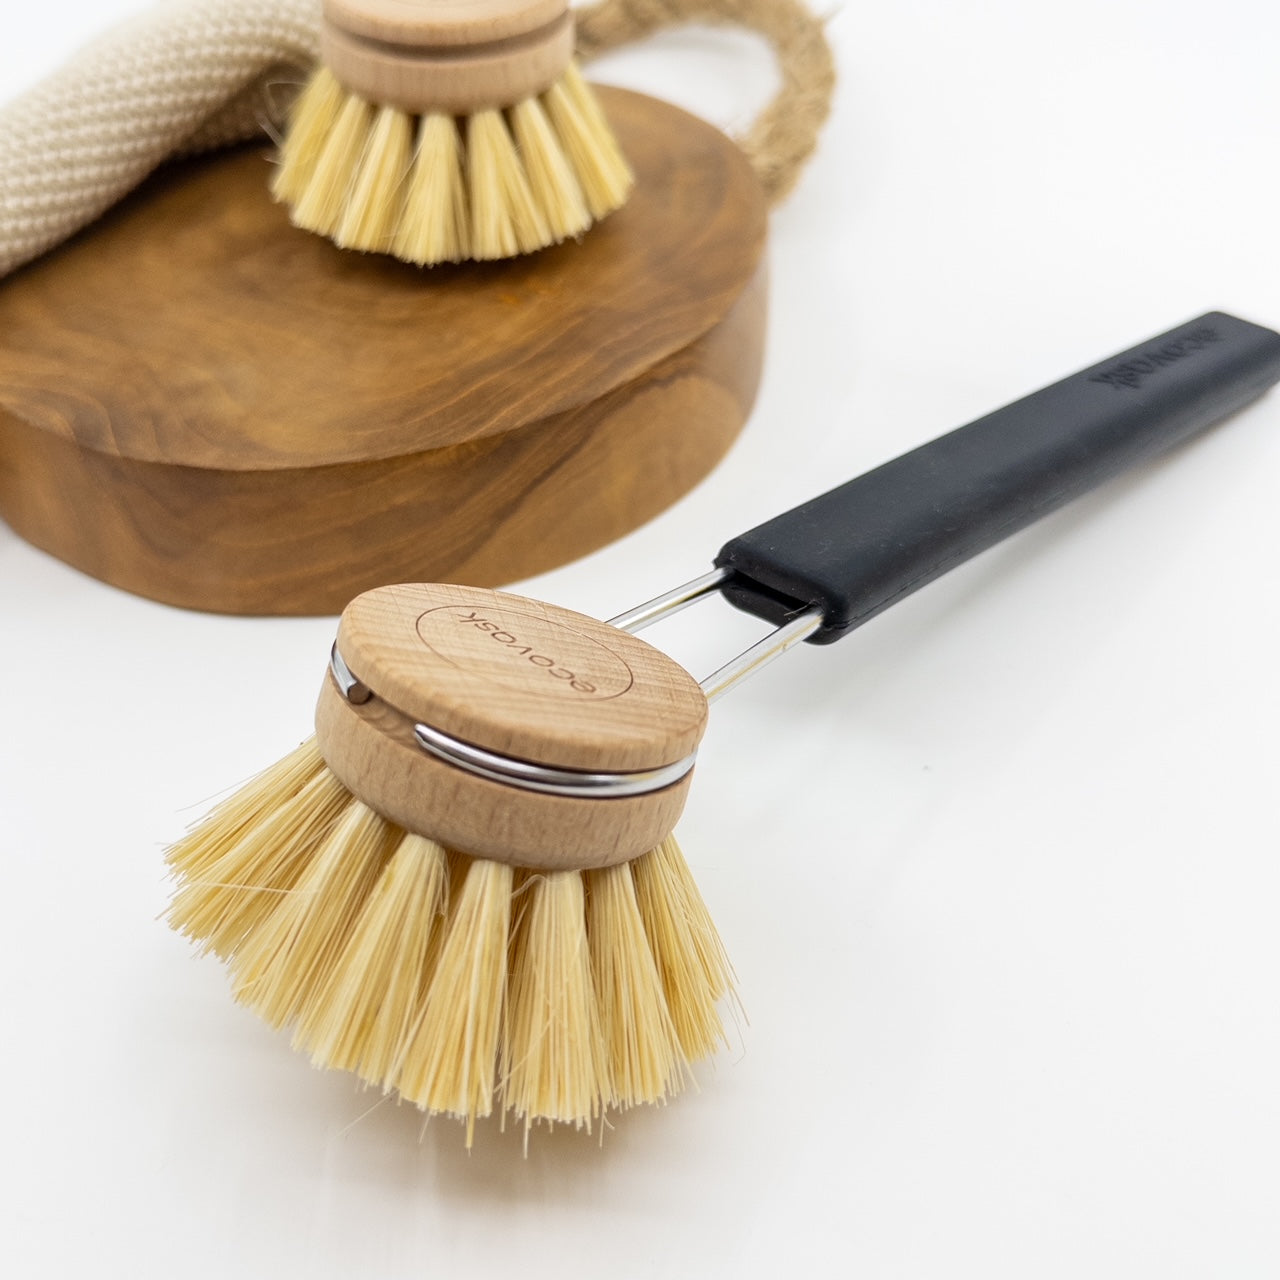 Dish Brushes and Refills